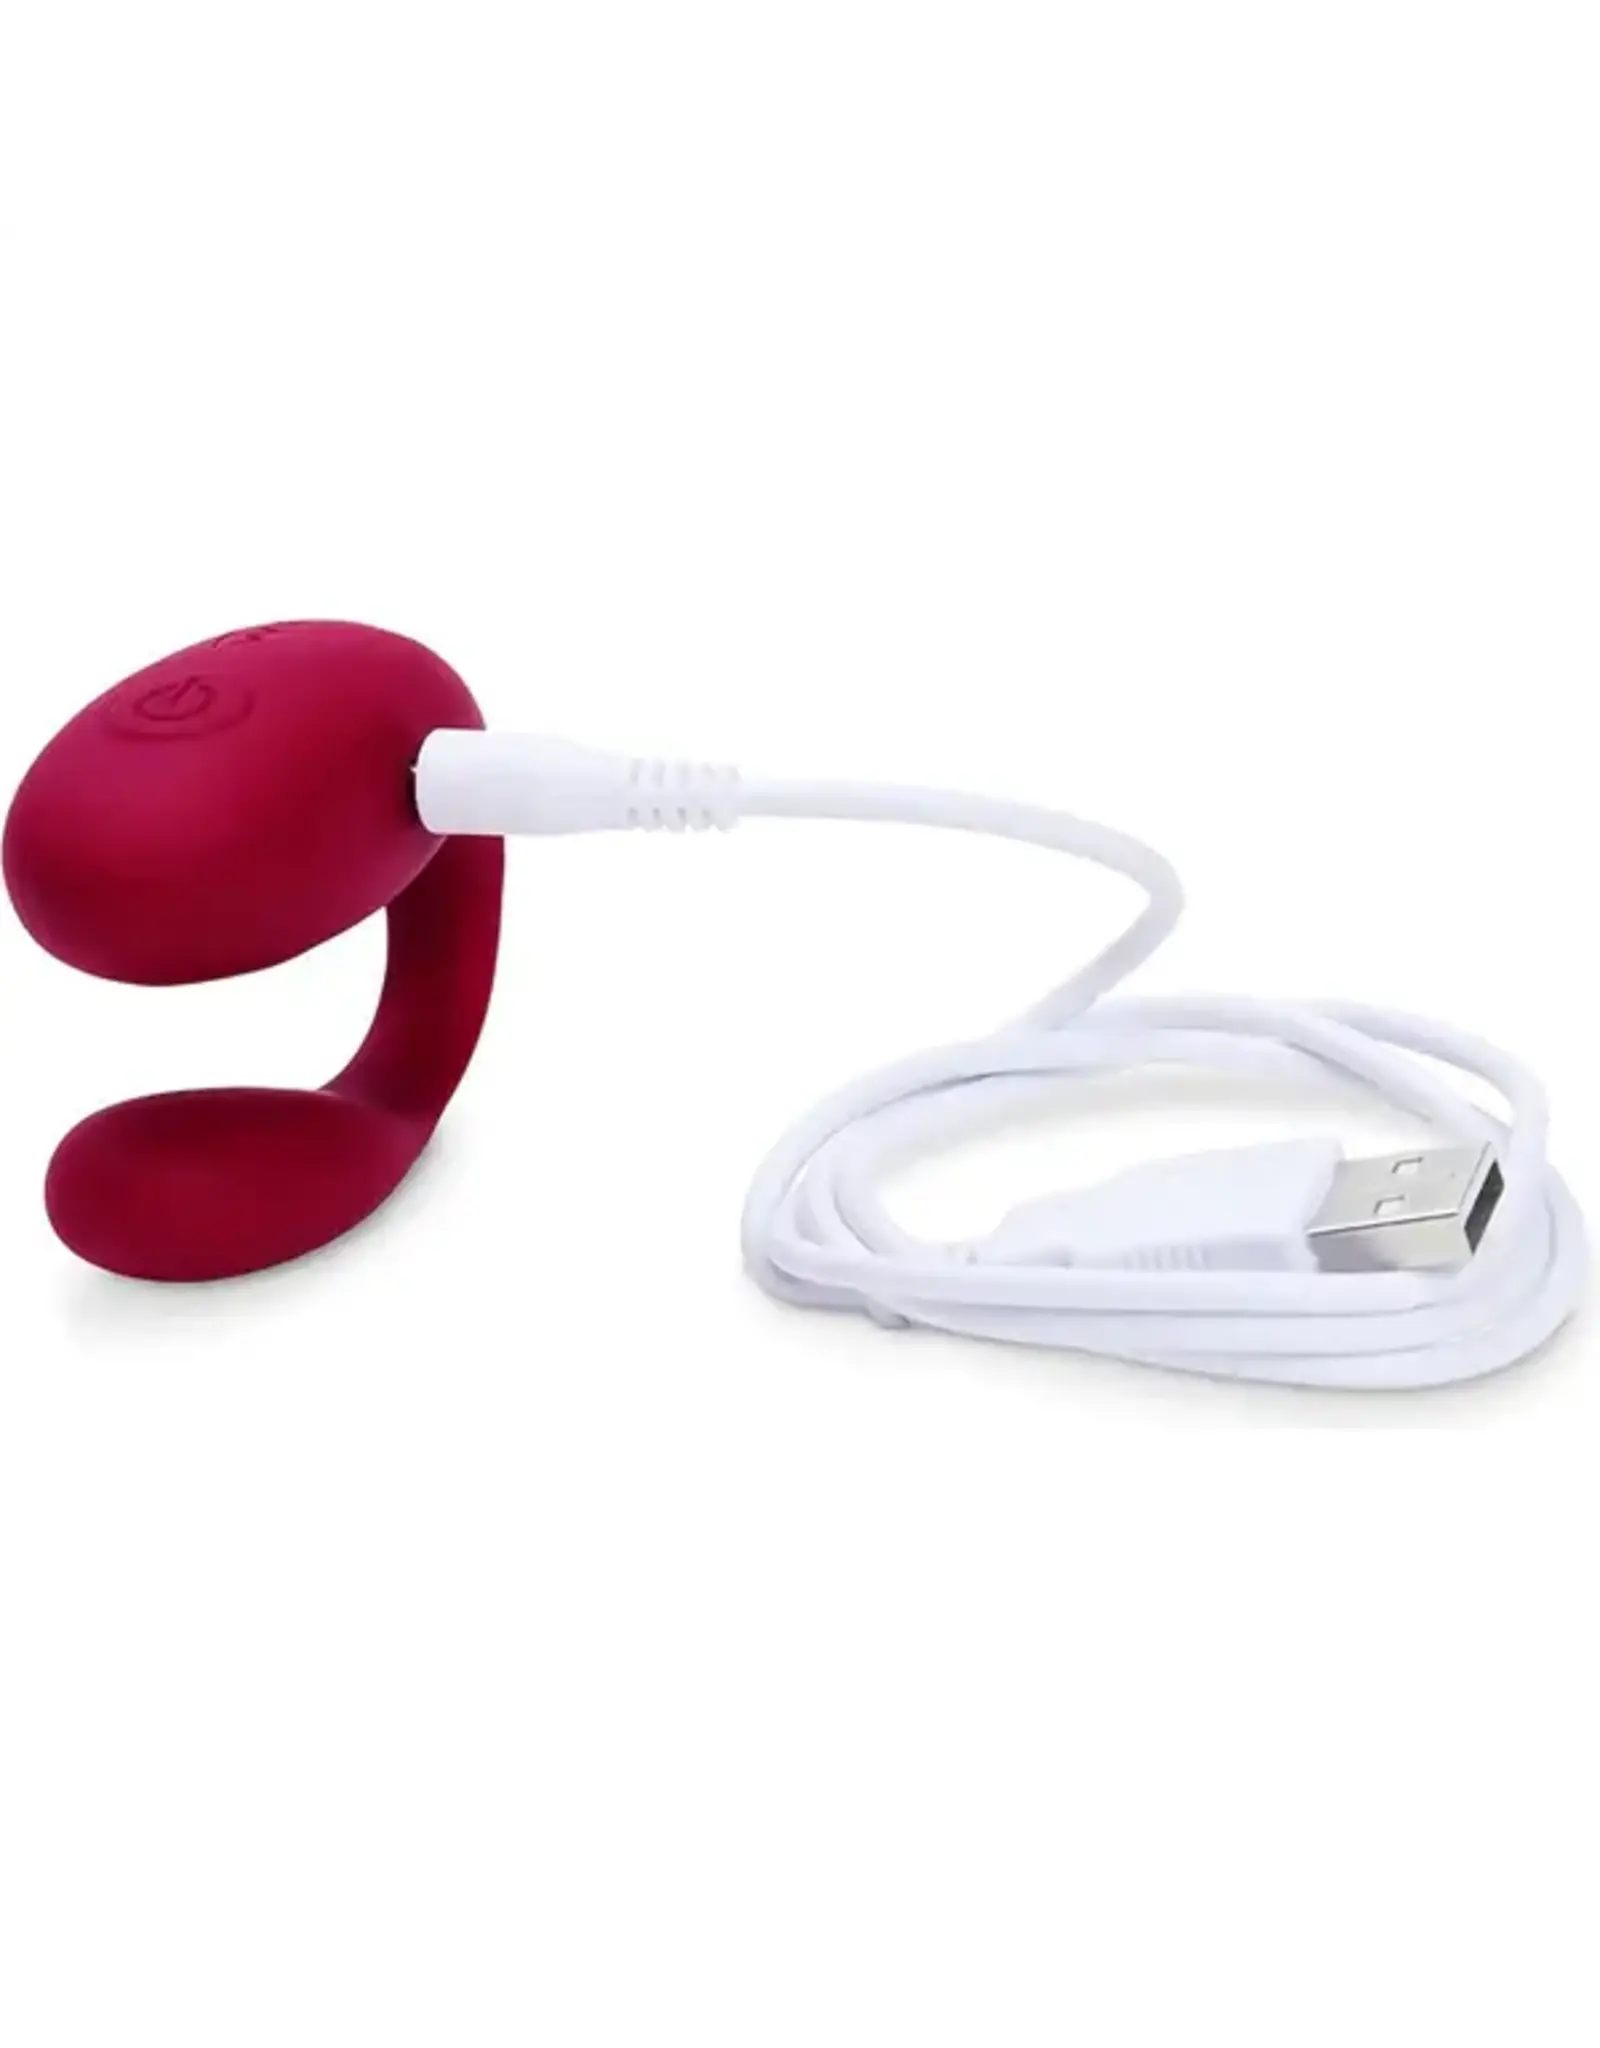 WE-VIBE We-Vibe - Special Edition Couples Vibrator